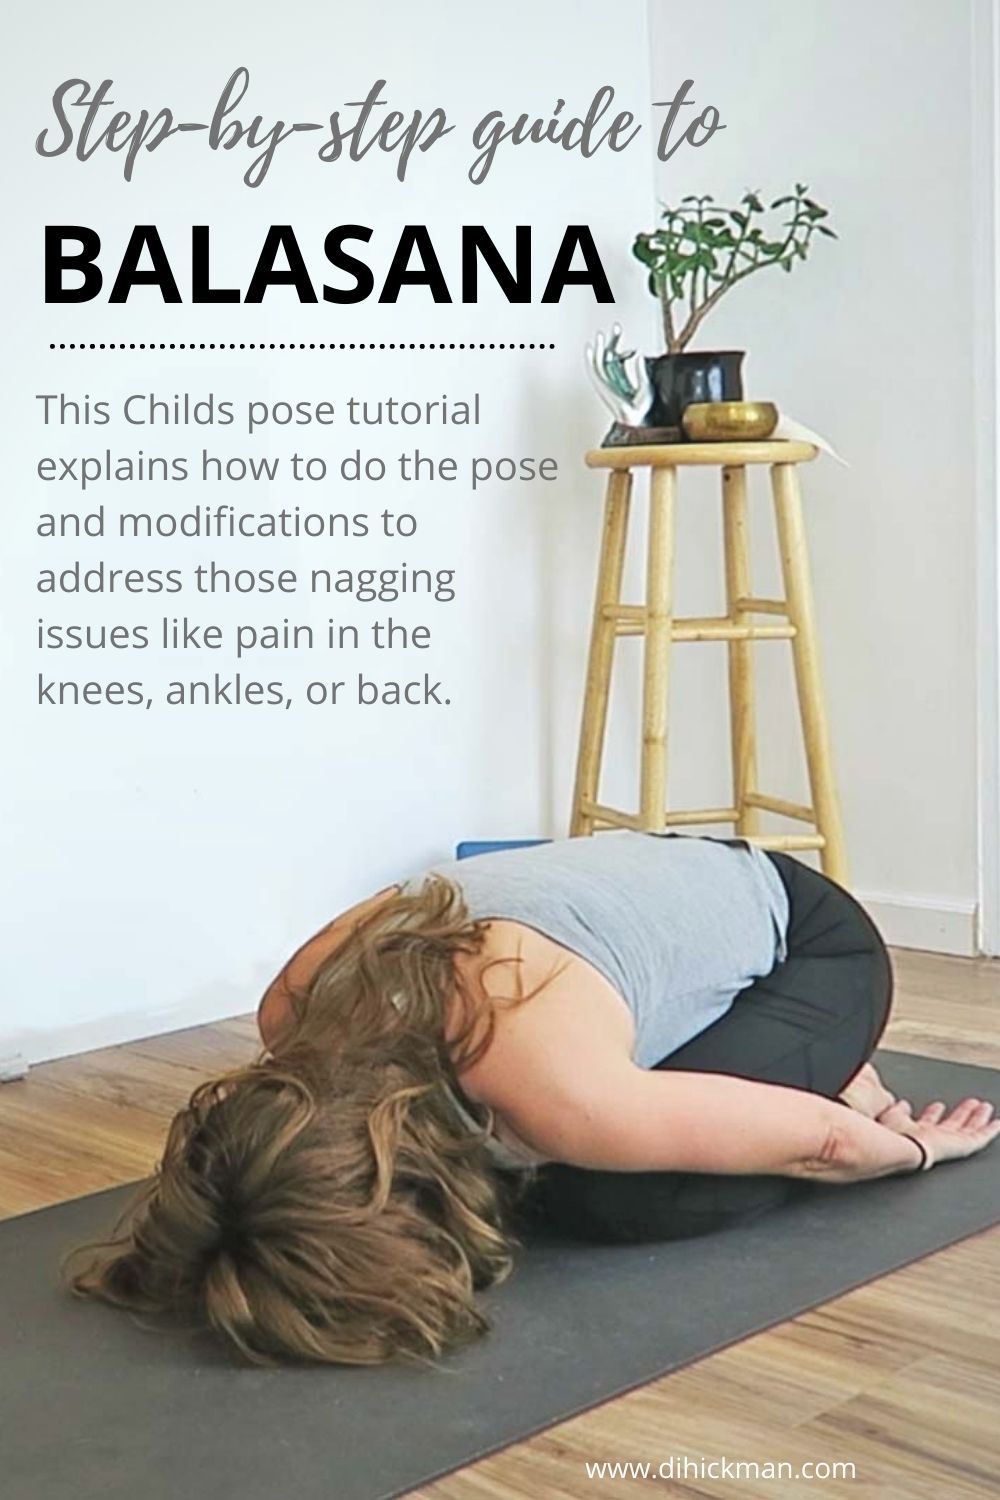 step by step guide to balasana. This Childs pose tutorial explains how to do the pose and modifications to address those nagging issues like pain in the knees, ankles, or back.